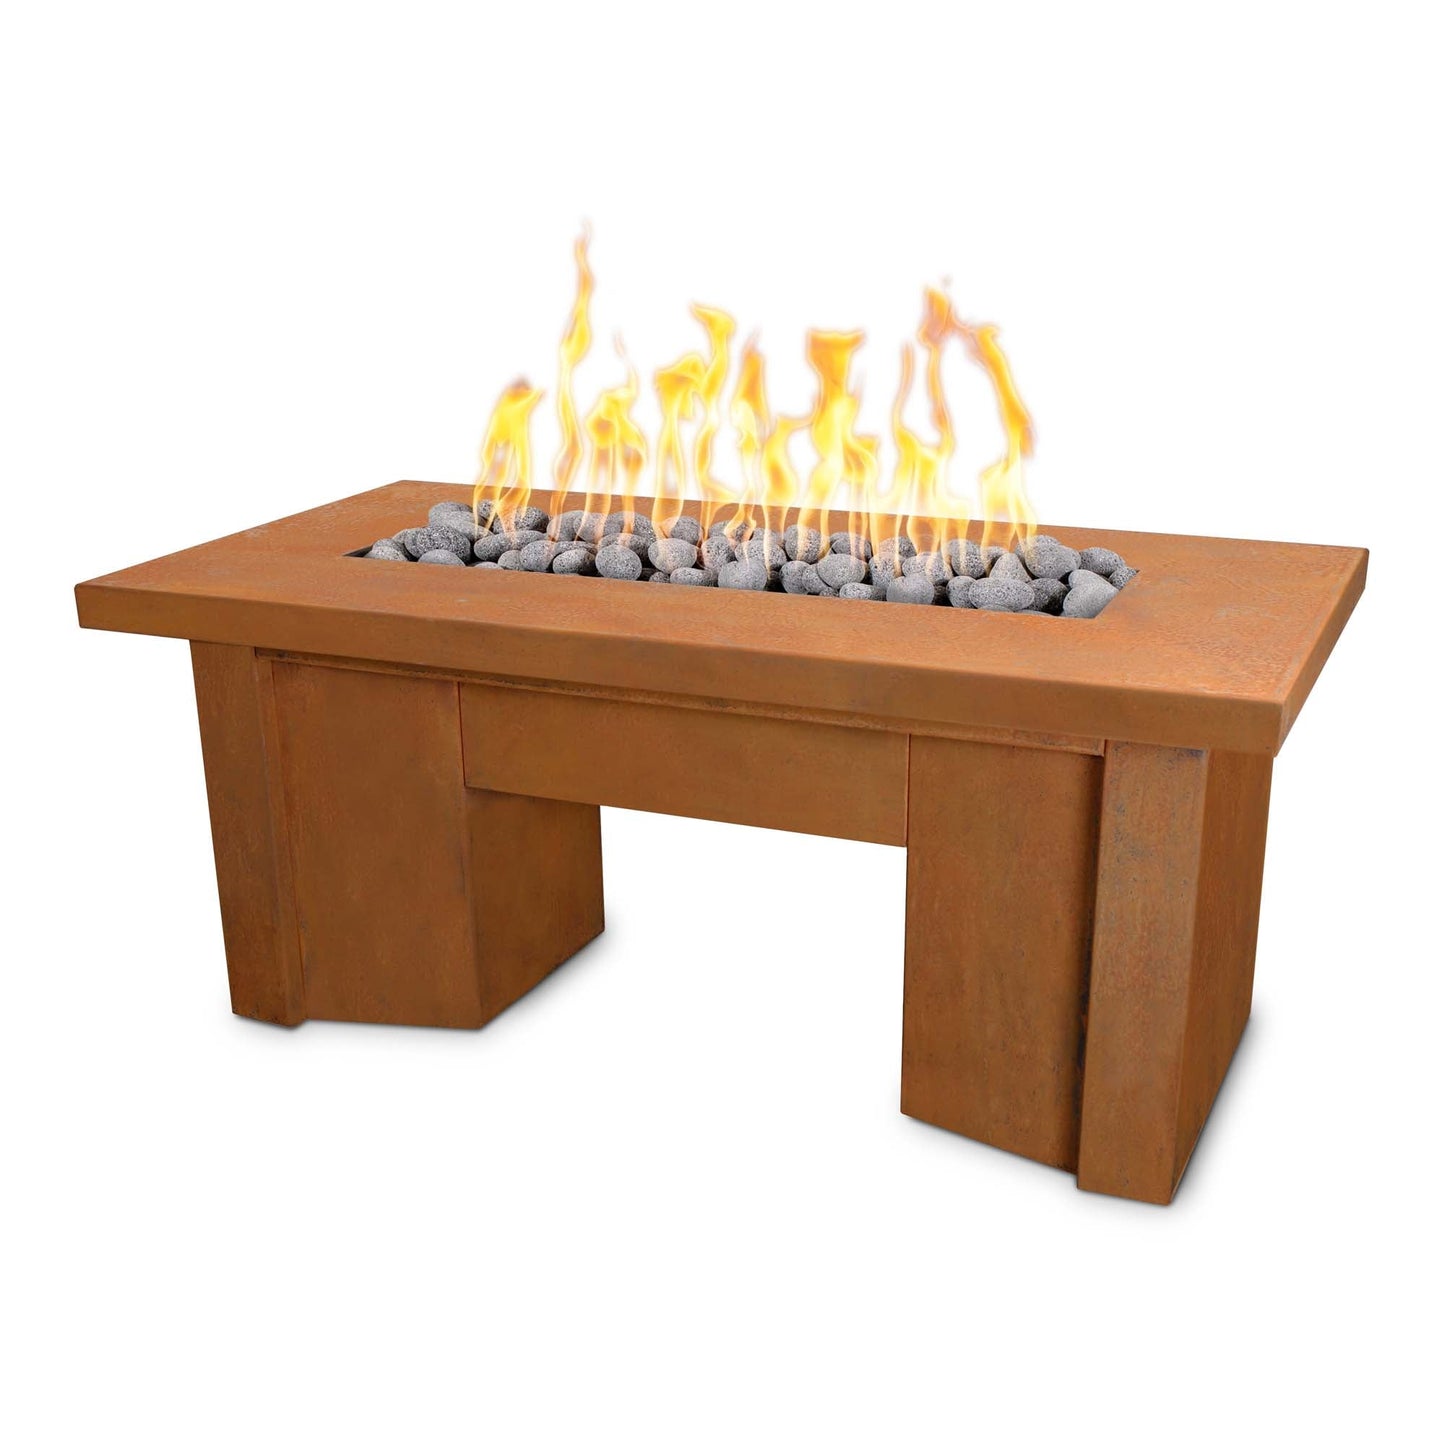 The Outdoor Plus Rectangular Alameda 60" Corten Steel Liquid Propane Fire Pit with Flame Sense with Spark Ignition